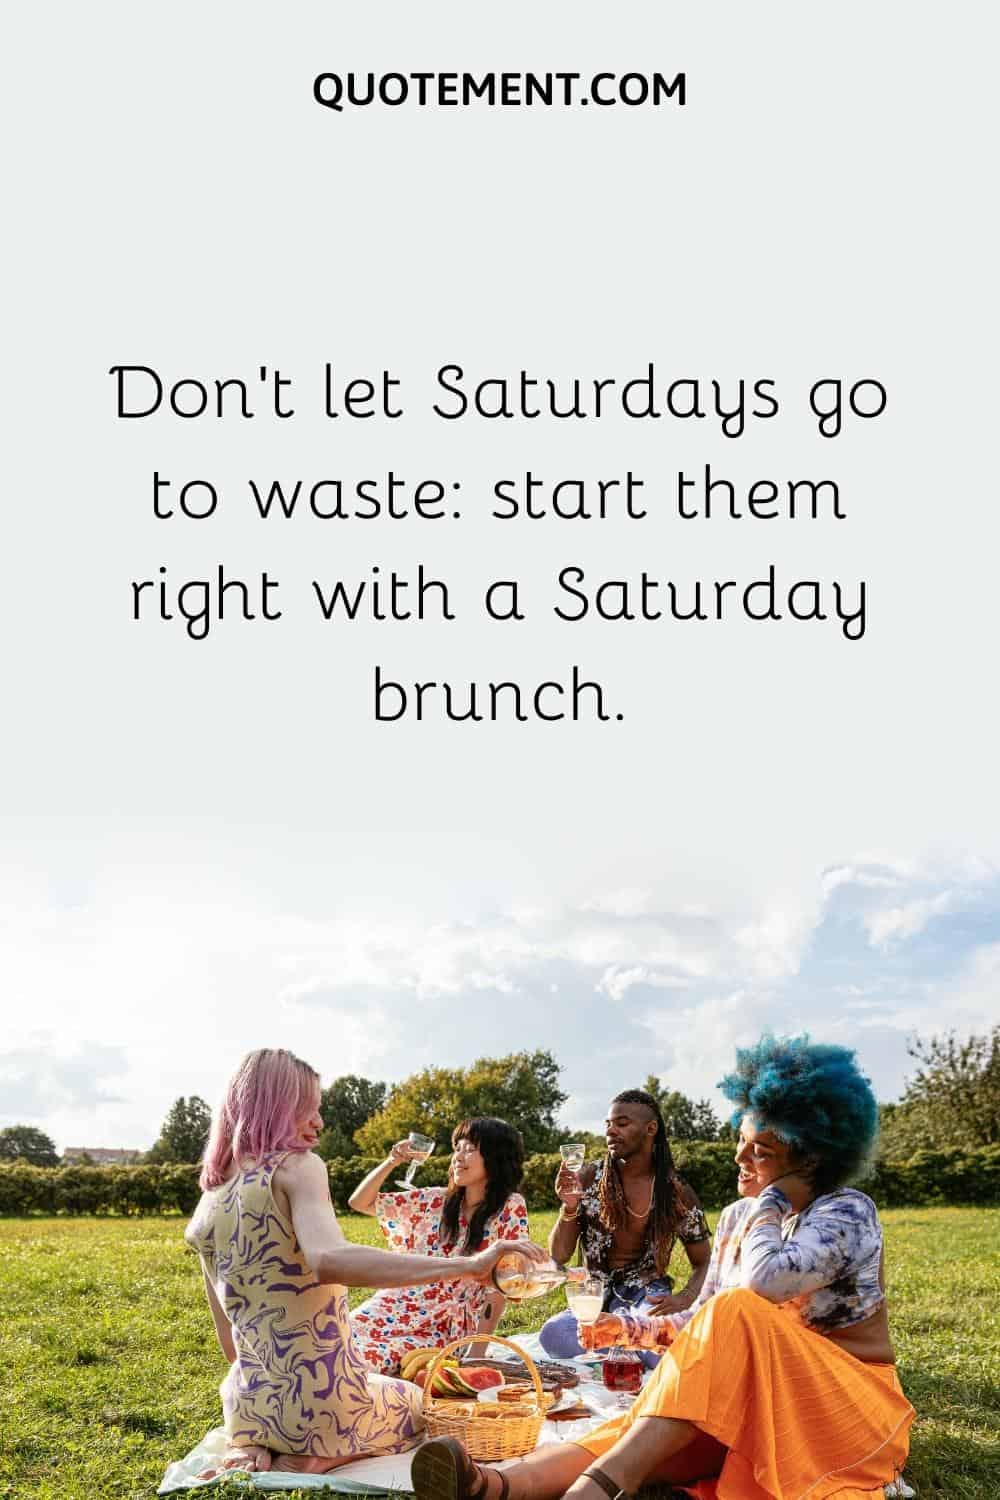 Don’t let Saturdays go to waste start them right with a Saturday brunch.